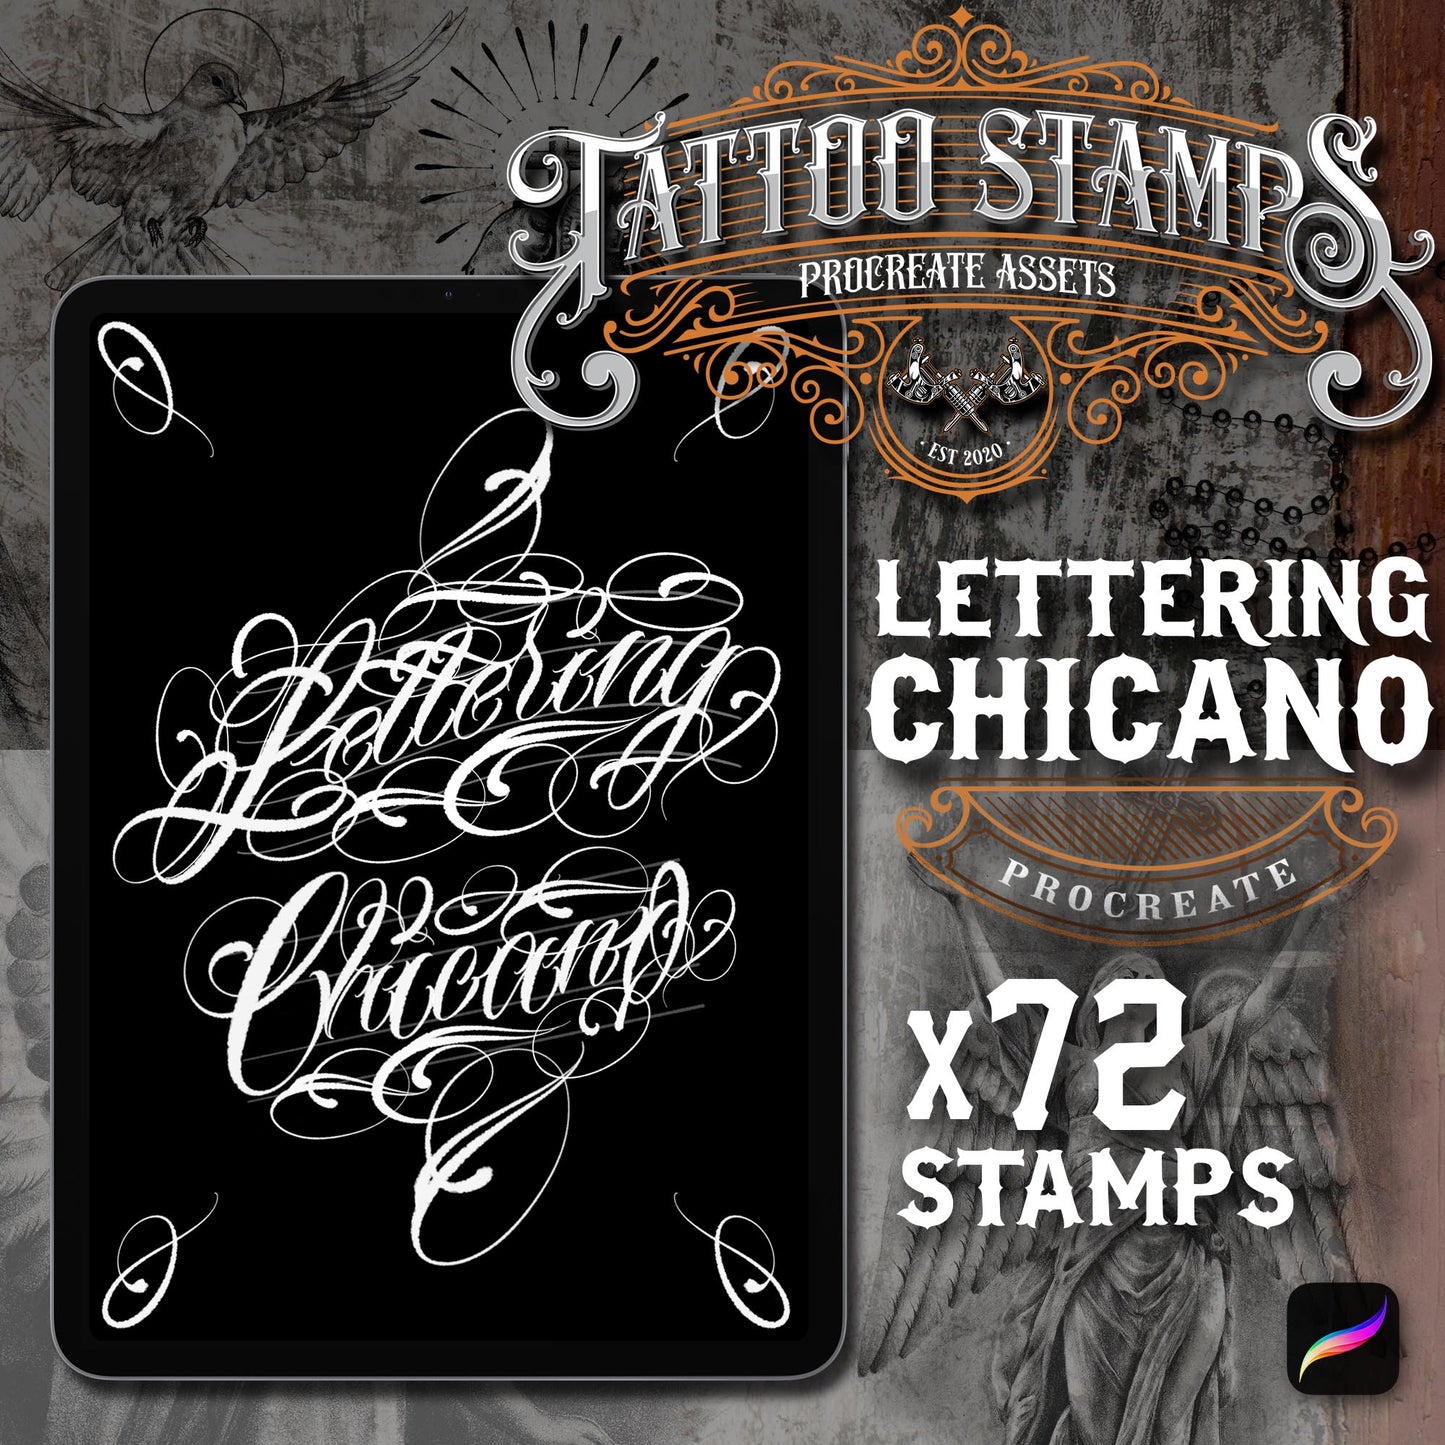 72 Lettering Chicano Tattoo Procreate app for iPad & iPad pro  in the Master Pack by TattooStampsArt